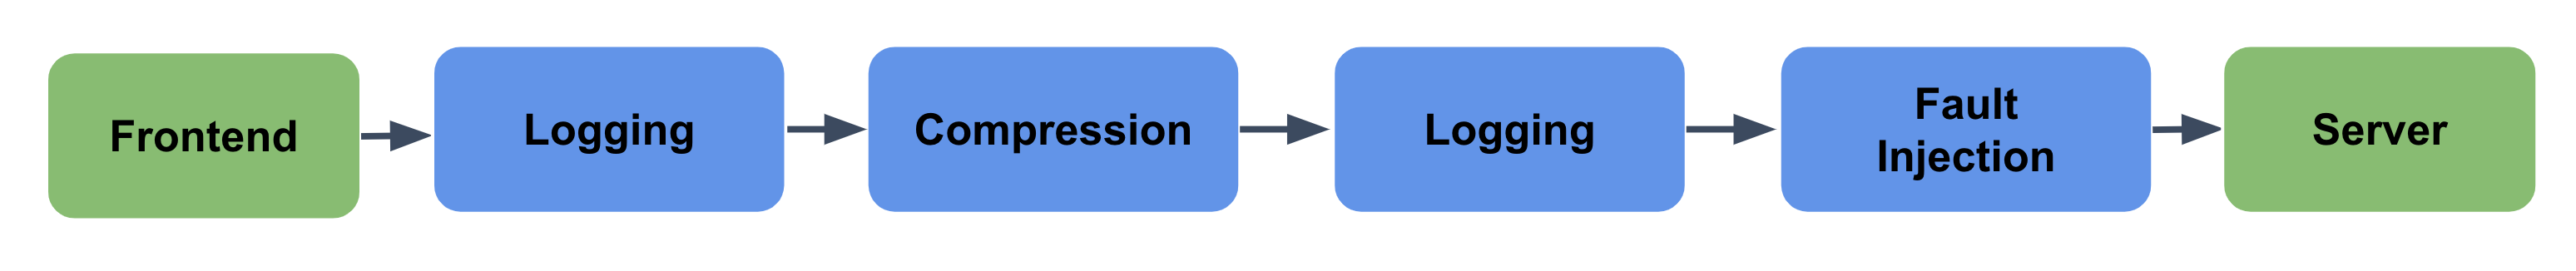 Example Chain